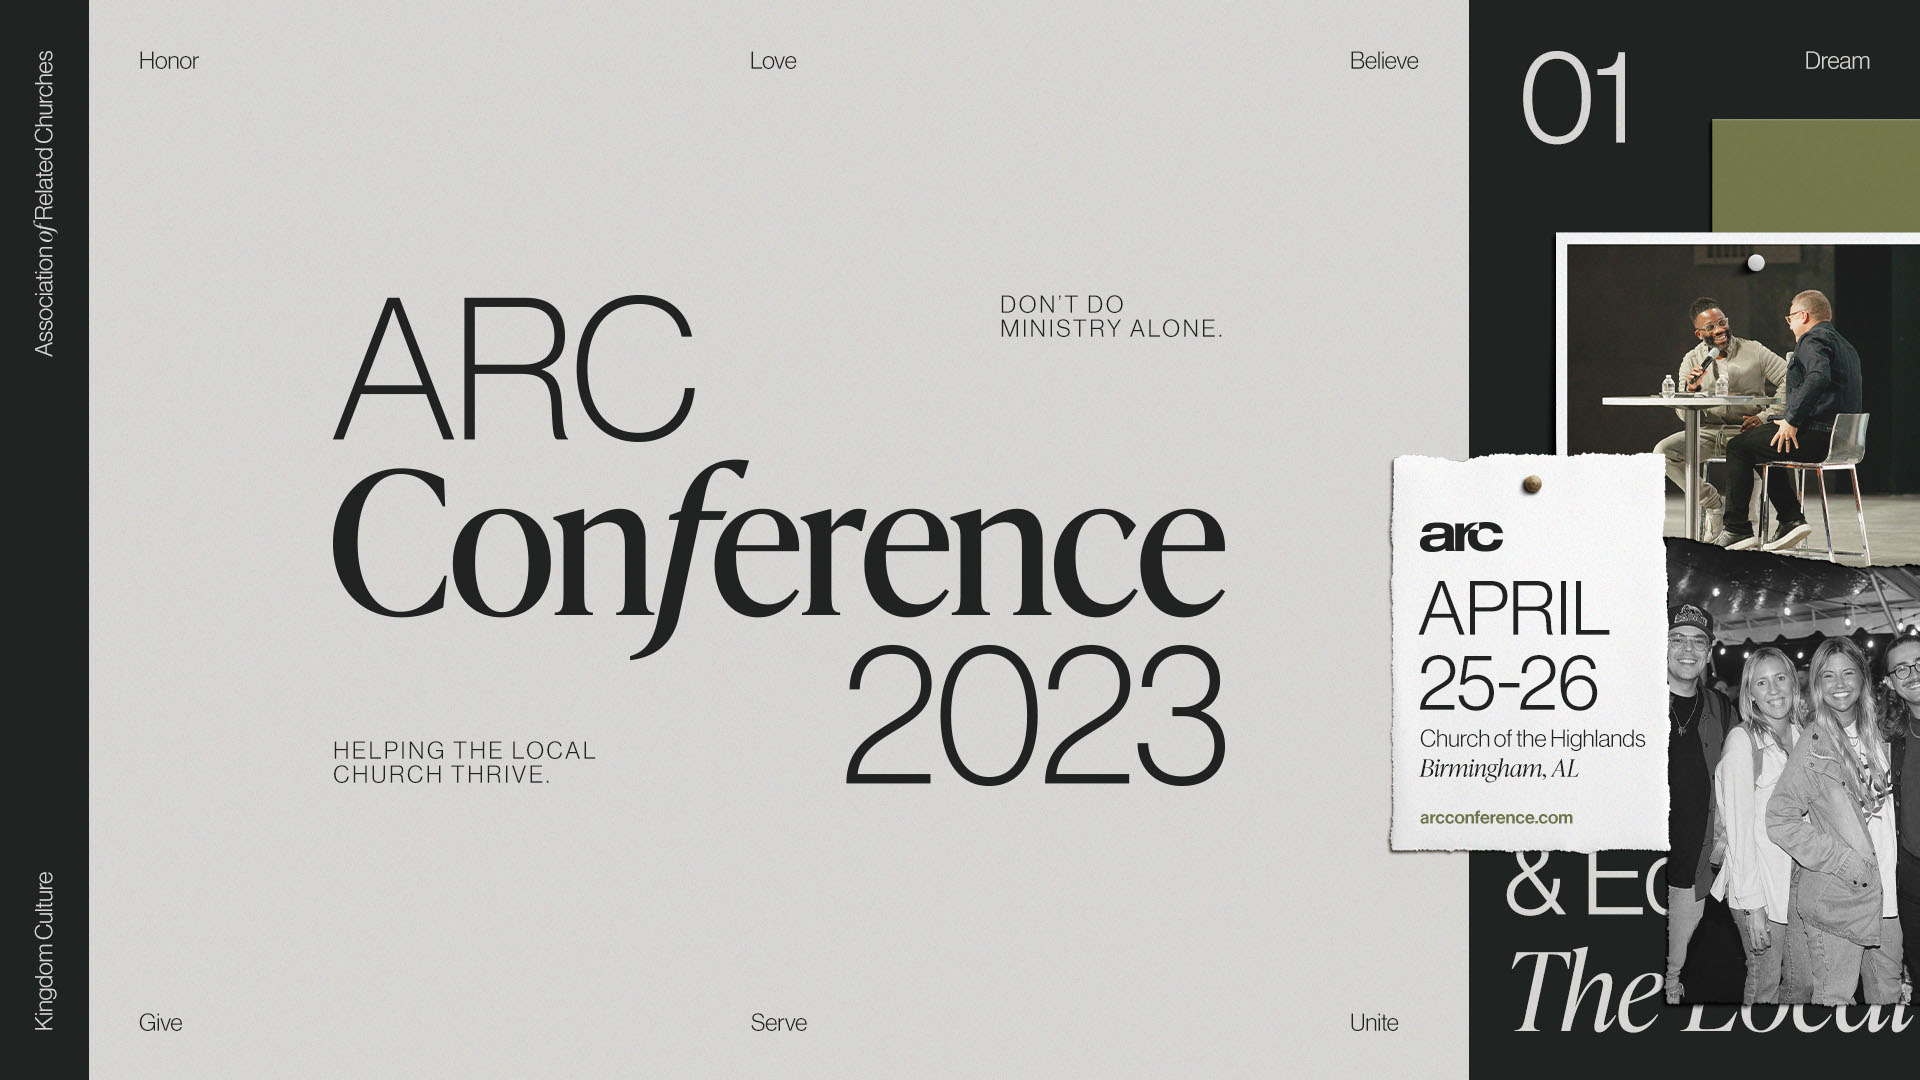 ARC Conference 2023 - Association of Related Churches | Brushfire